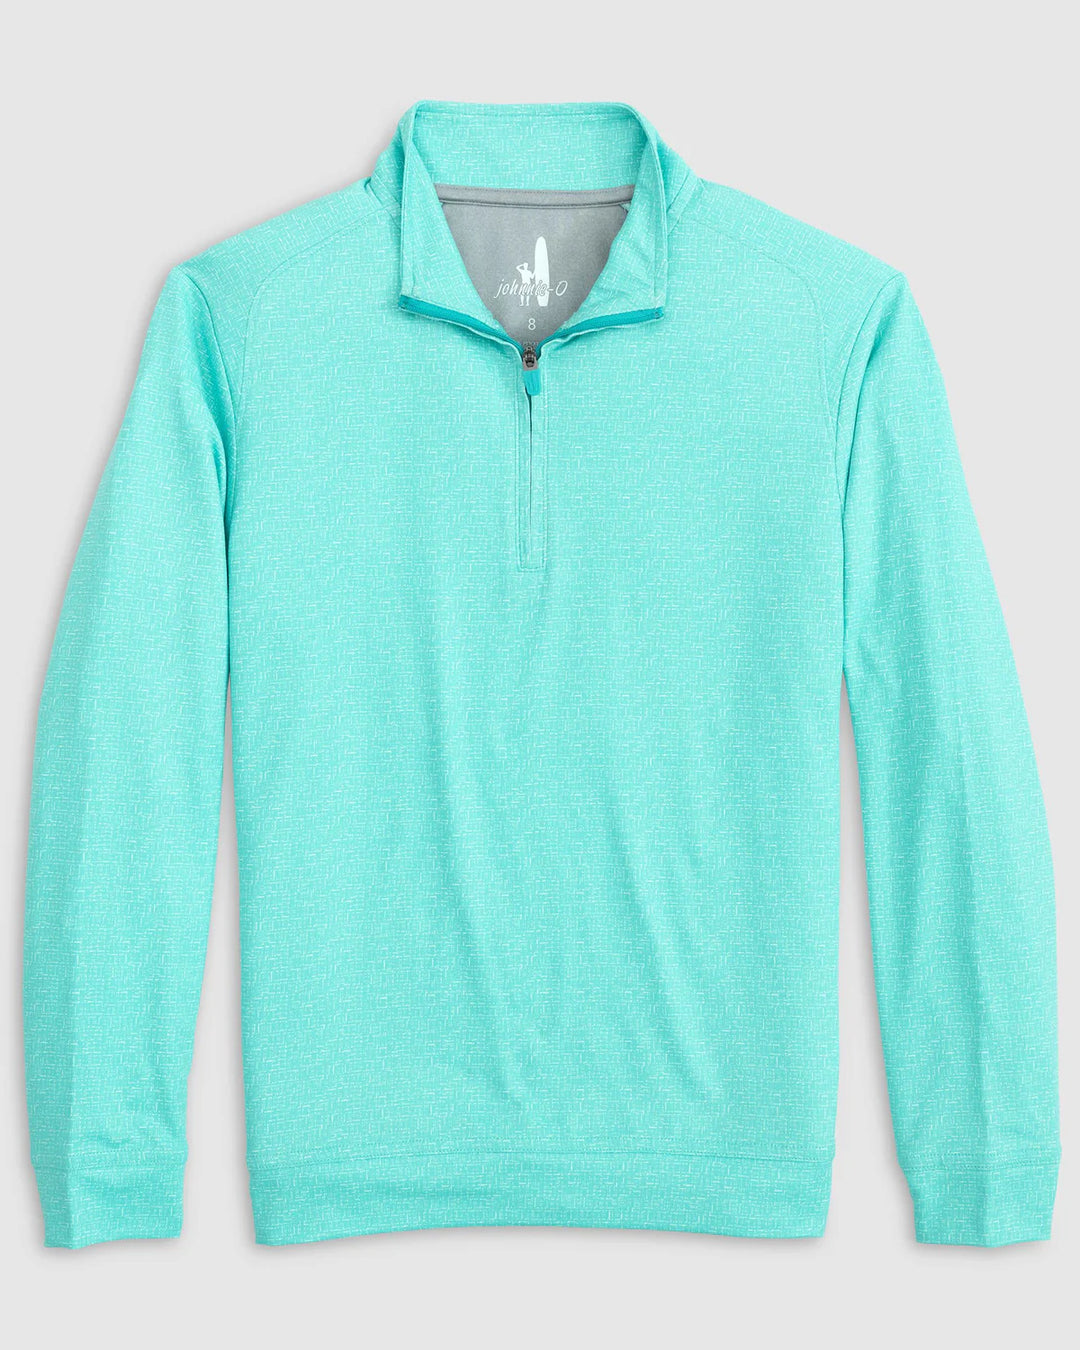 Miltons Jr. Printed Performance 1/4 Zip Pullover -Caicos